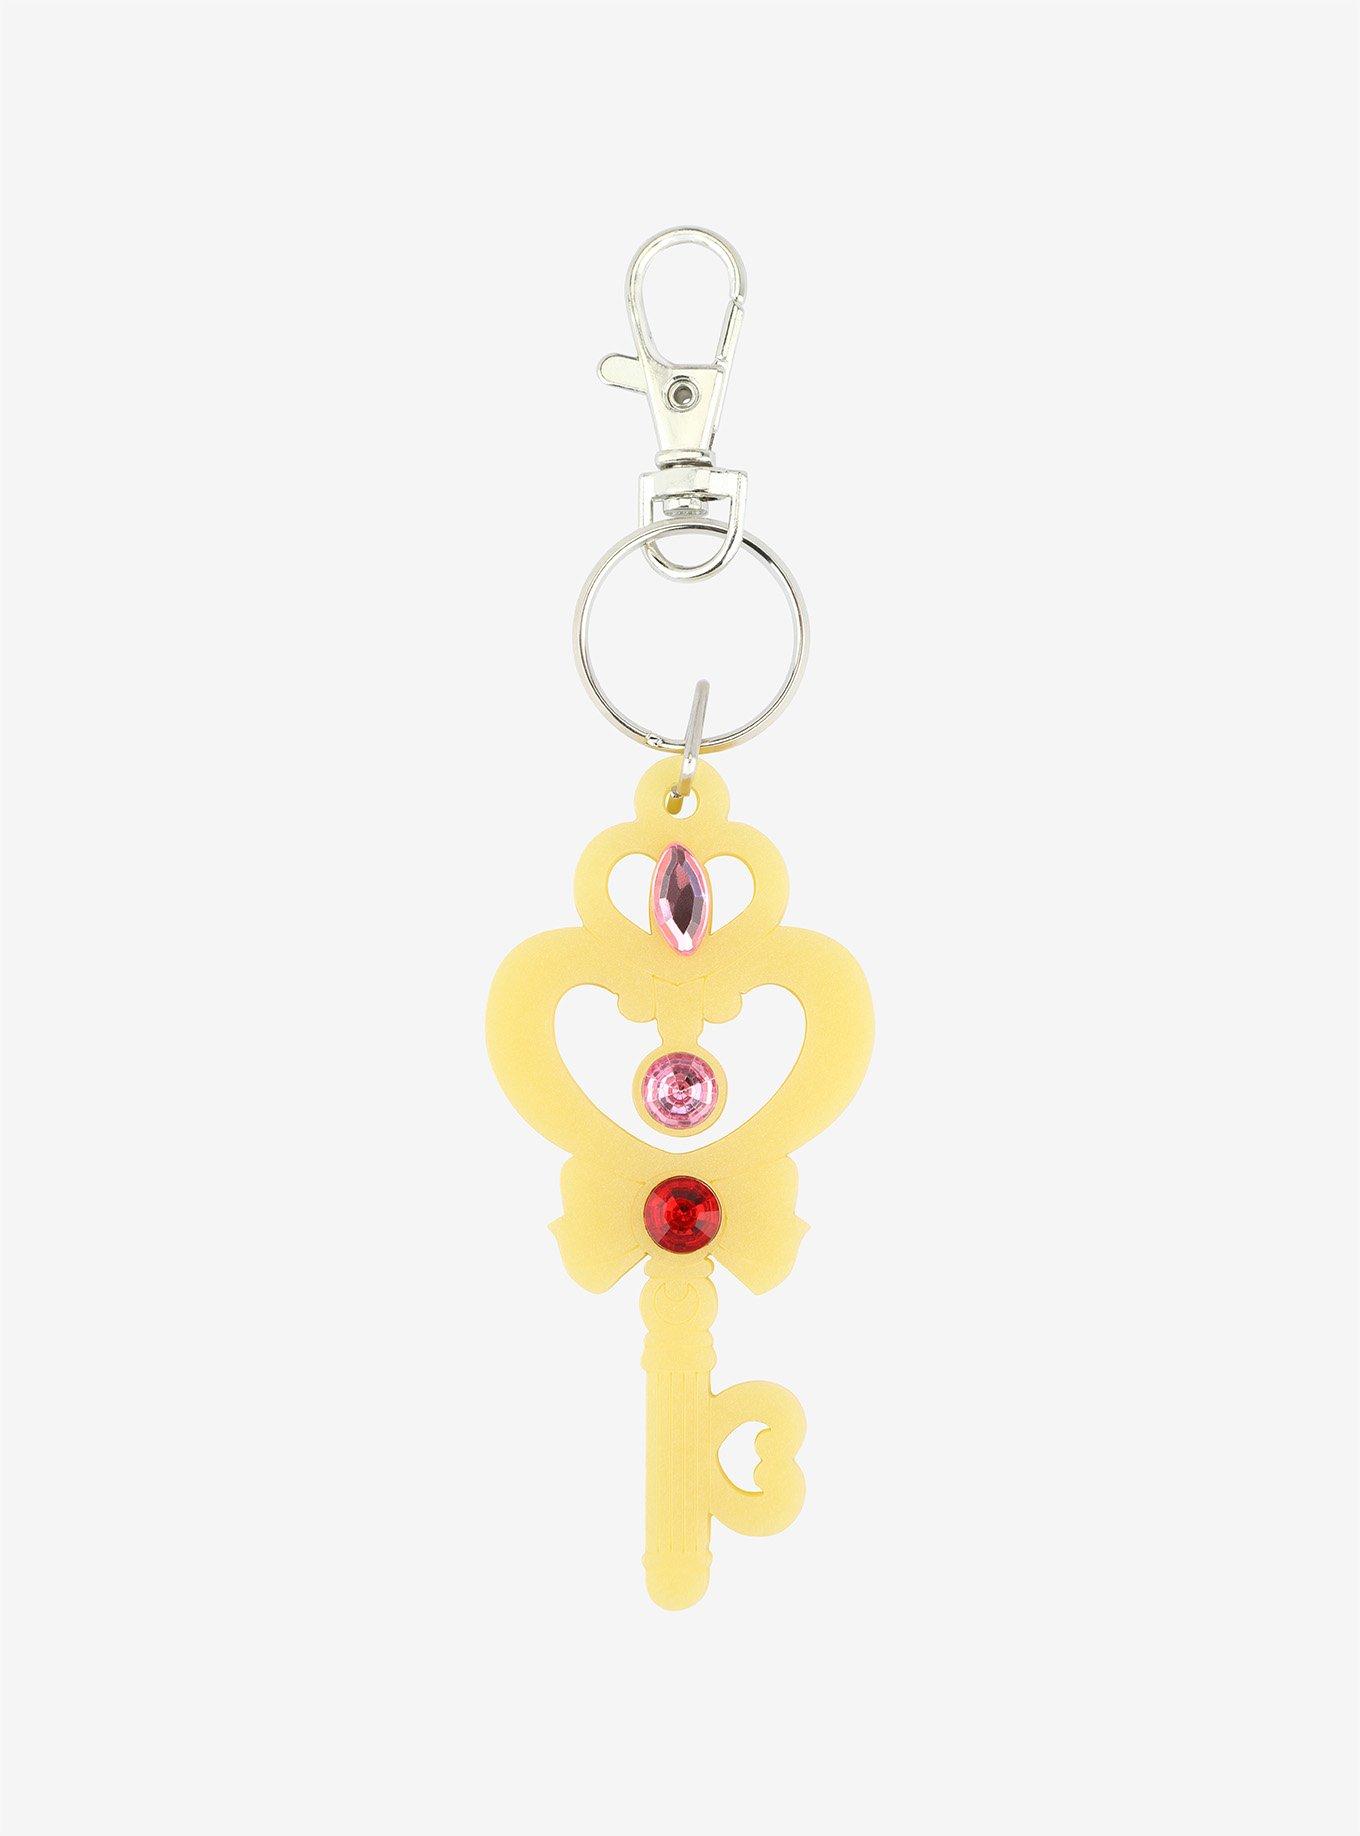 Sailor Moon Space-Time Key Key Chain | Hot Topic